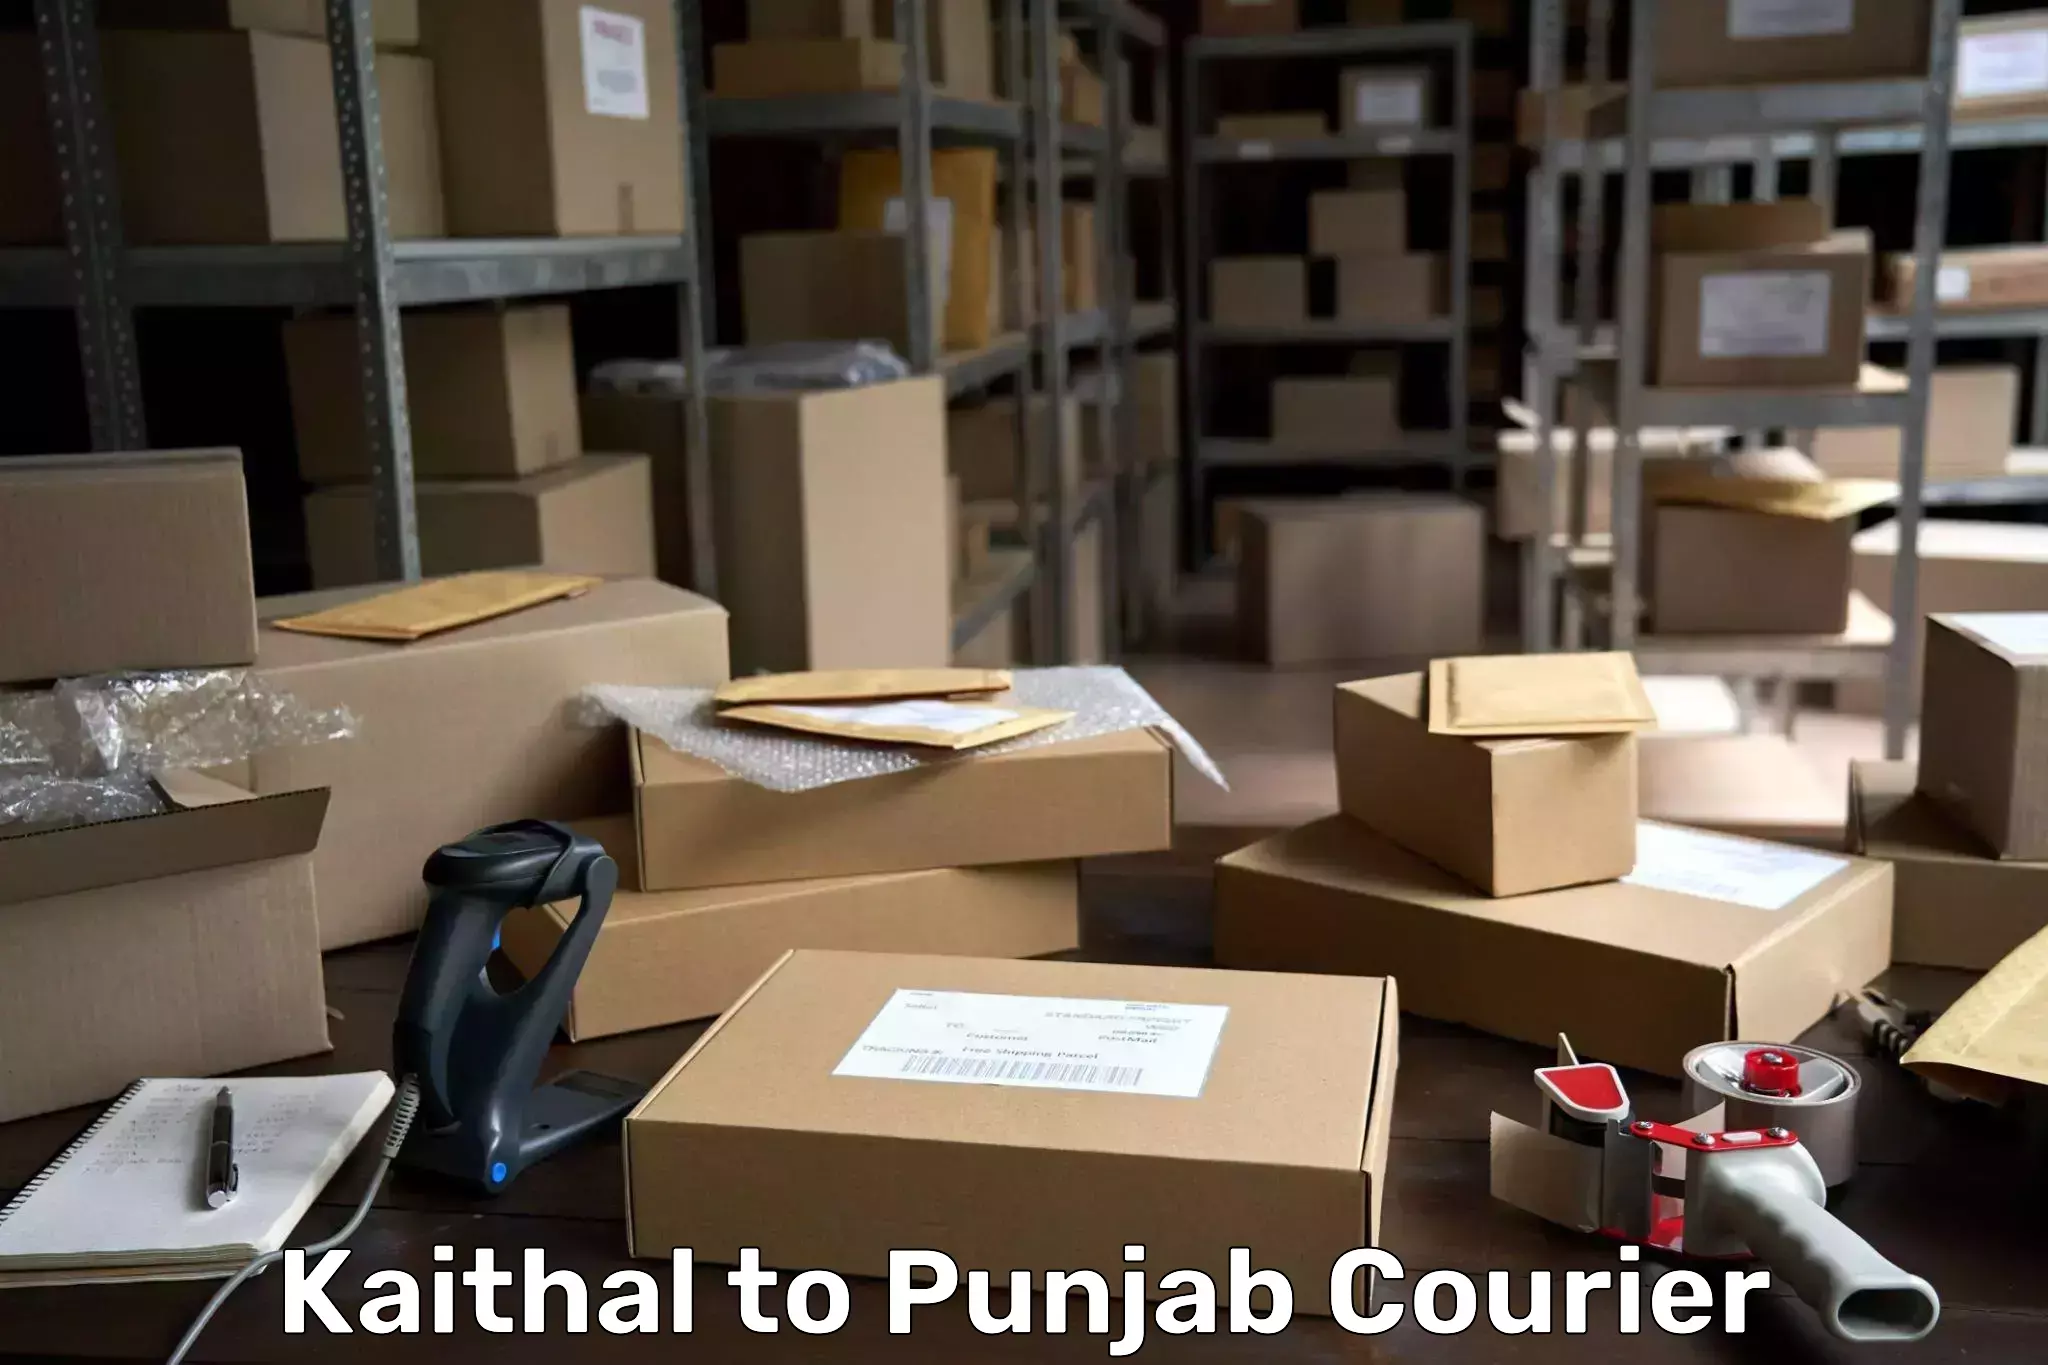 24-hour courier service Kaithal to Punjab